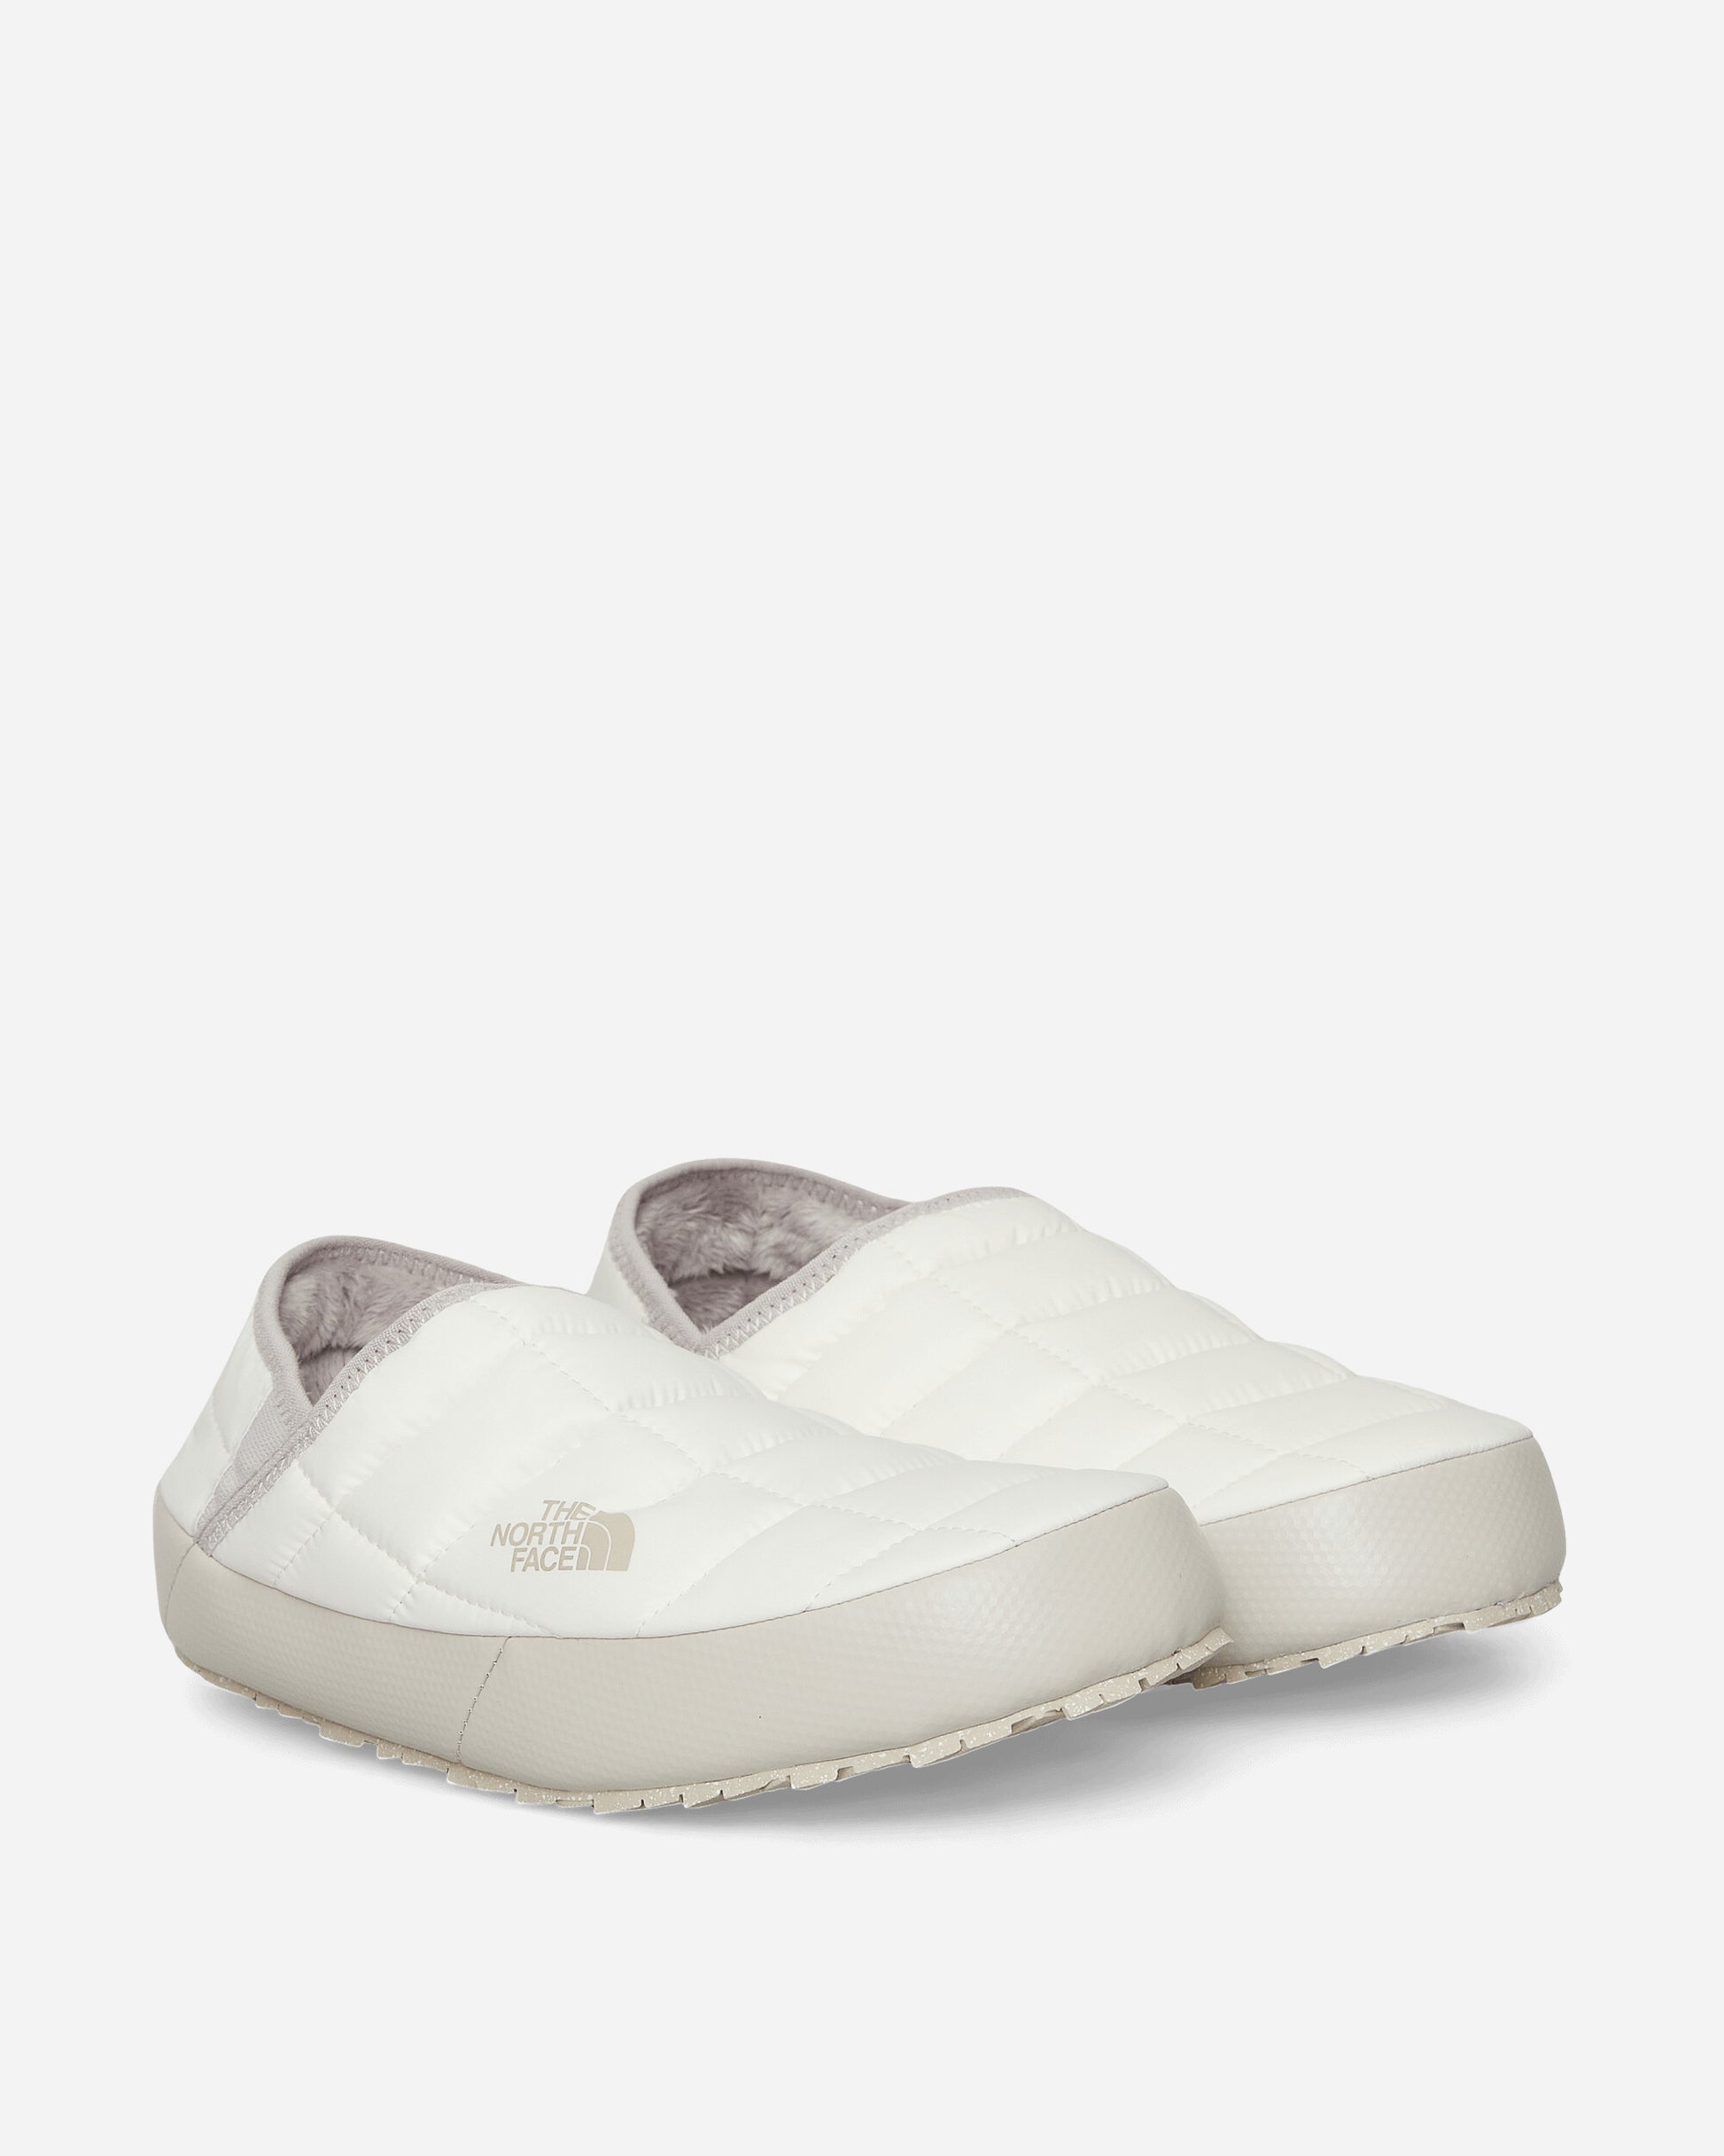 The North Face Wmns Women’S Thermoballtm Traction Mule V Gardenia White/Silver Grey Sandals and Slides Sandals and Mules NF0A3V1H 32F1